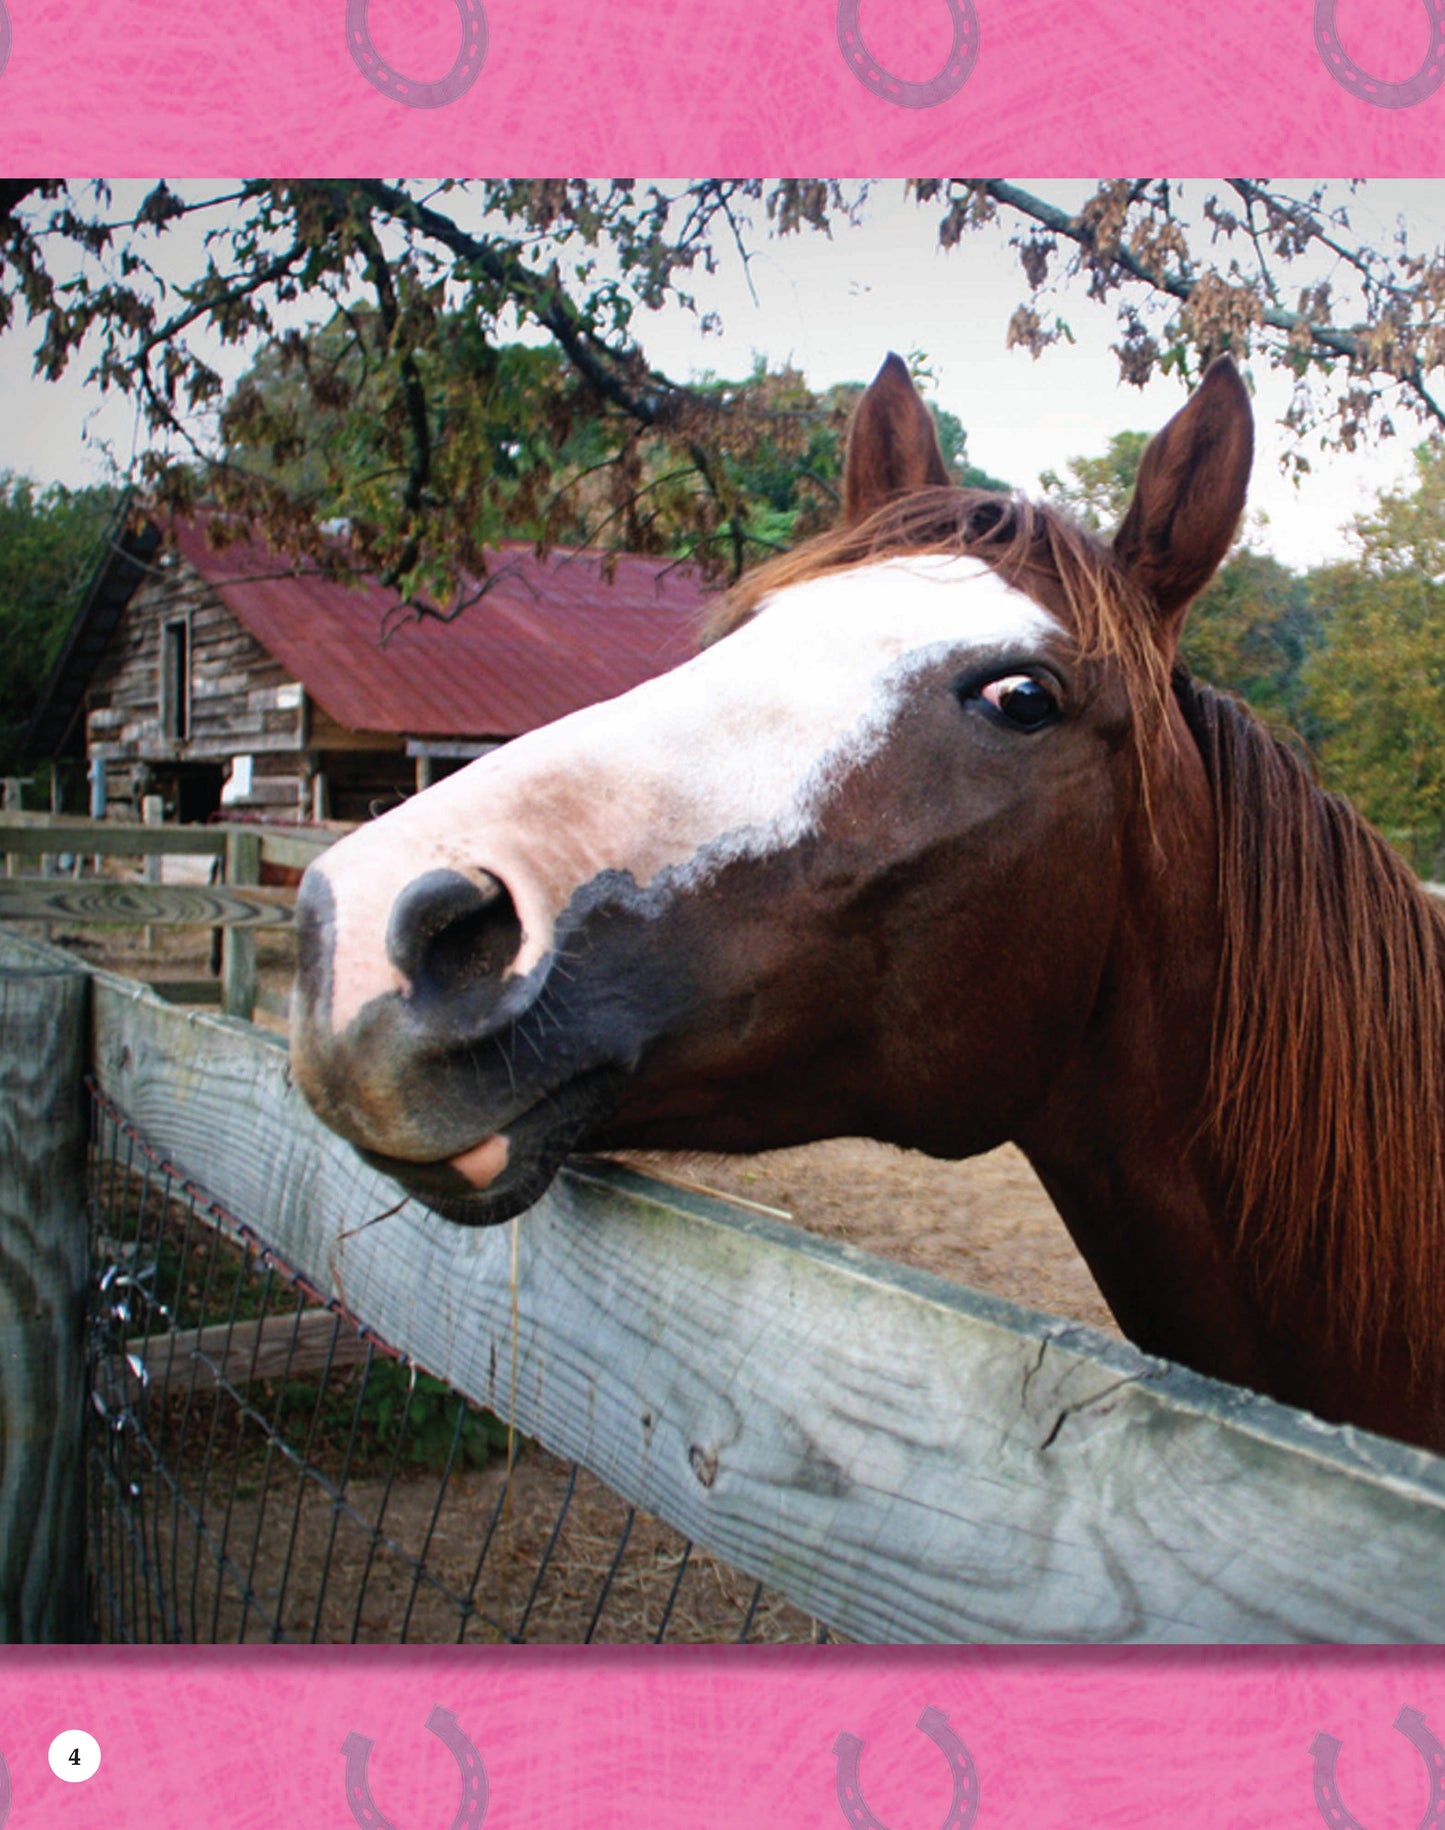 If Animals Could Talk: Horses